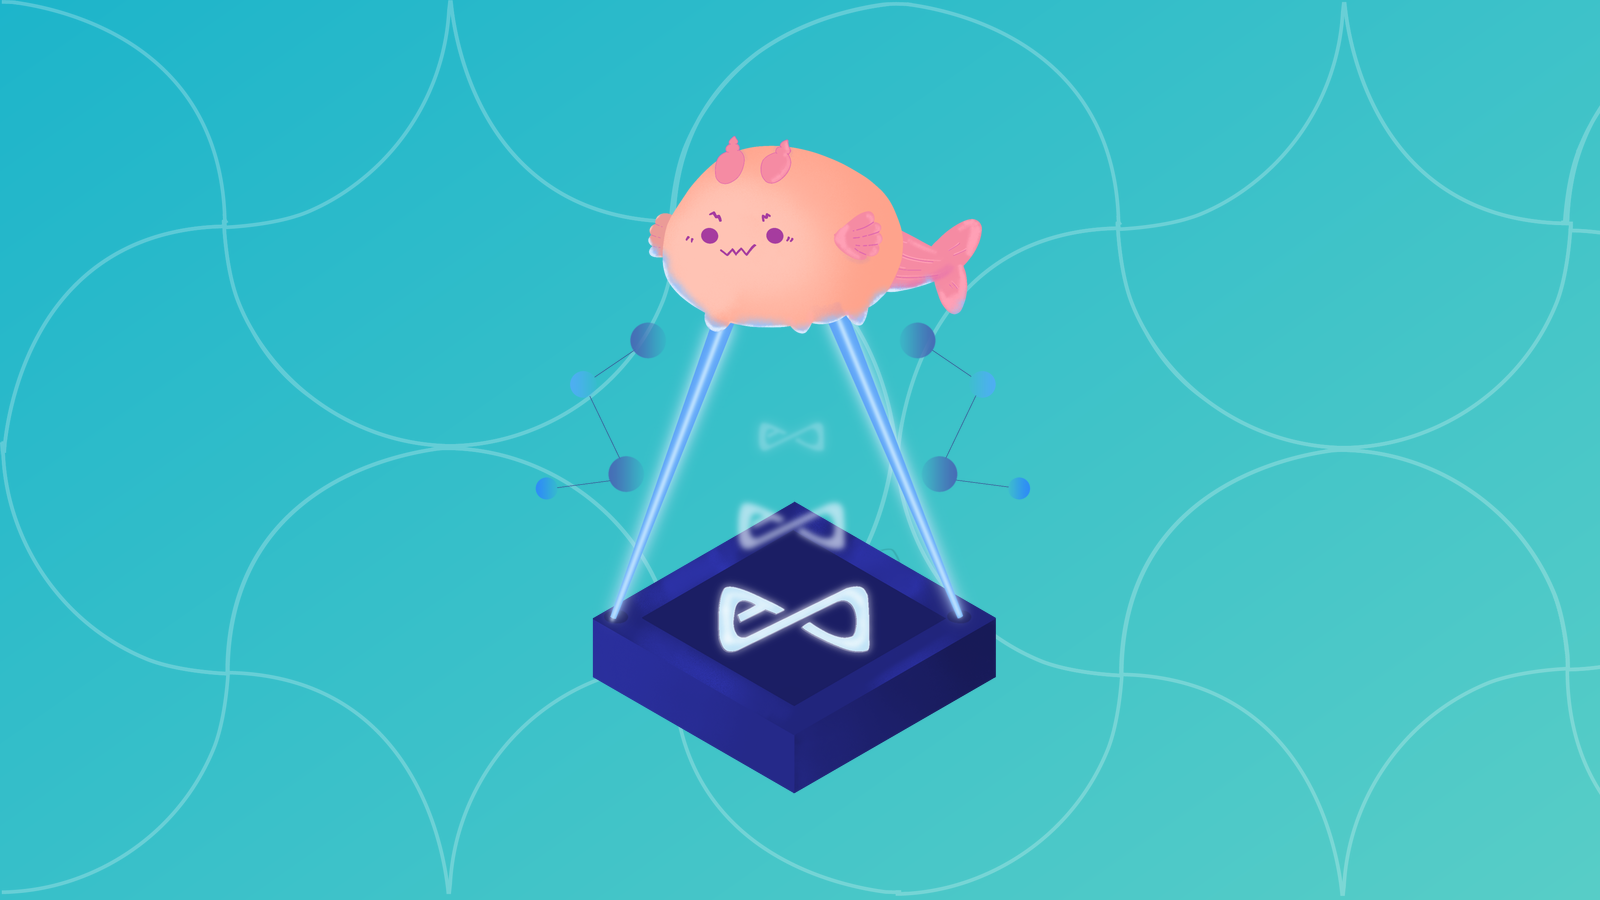 “Explore the world of Axie and unlock its mysteries”